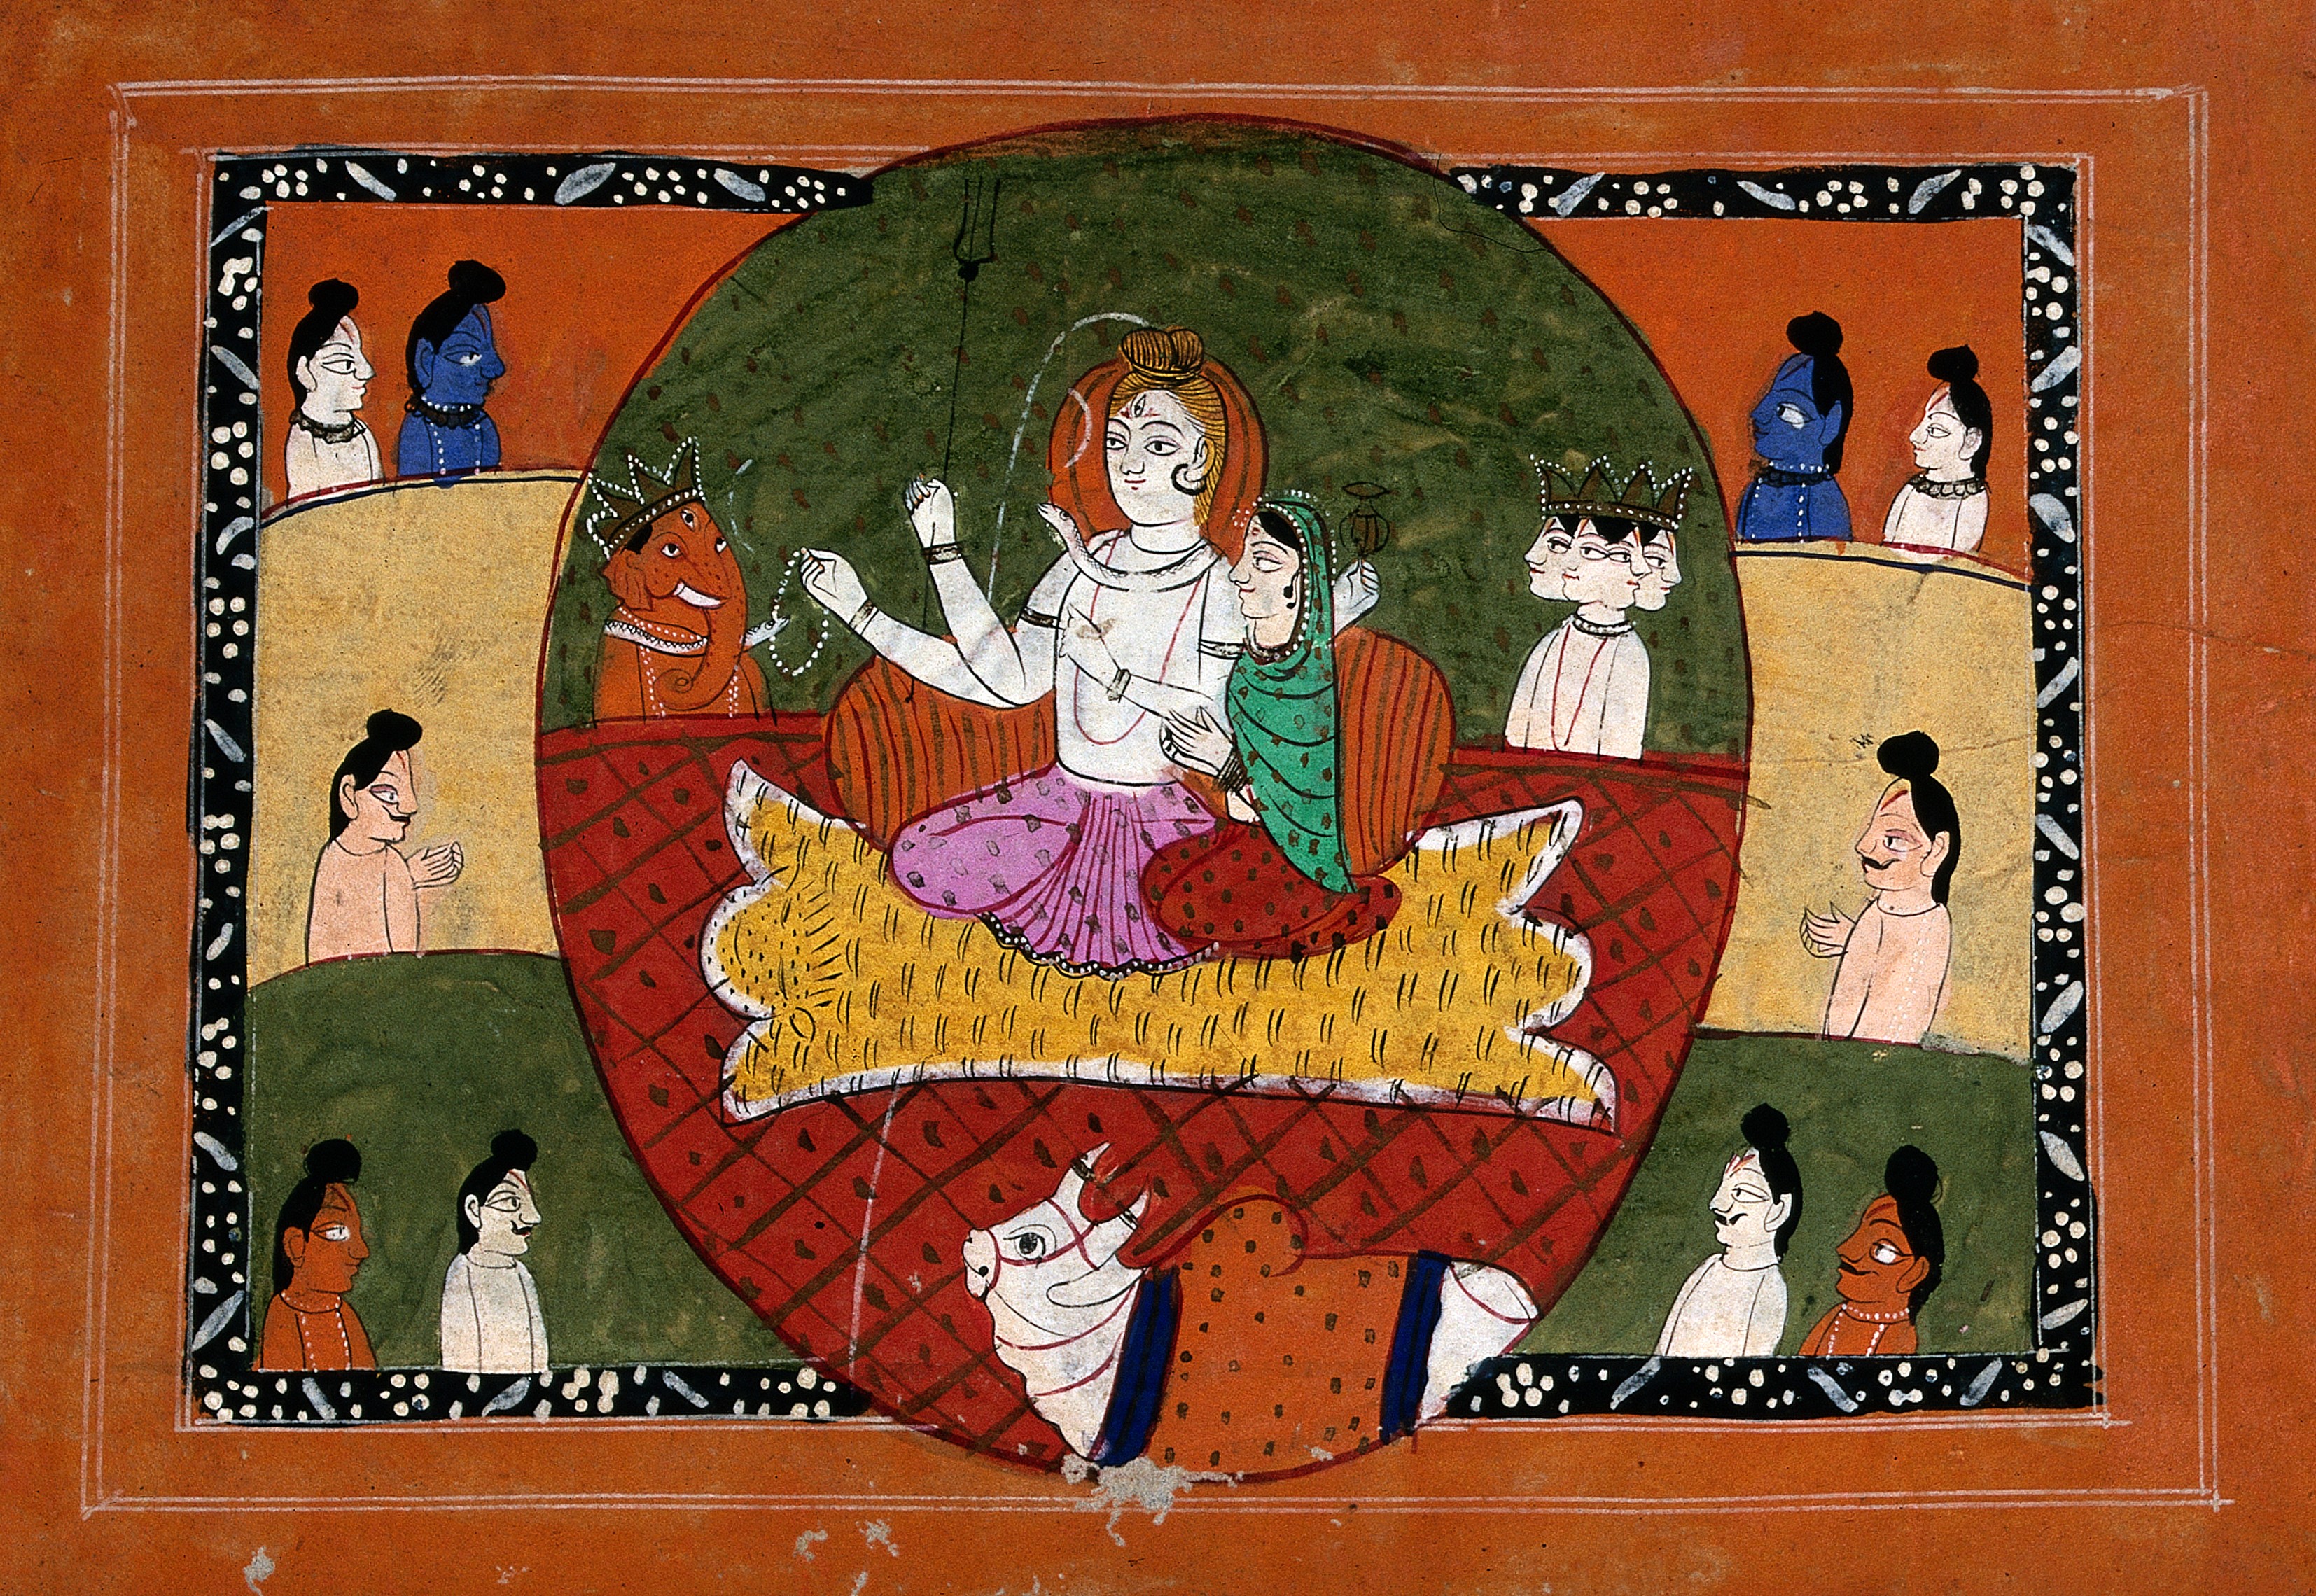 An Indian painting of Shiva depicted with the River Ganga flowing from his hair